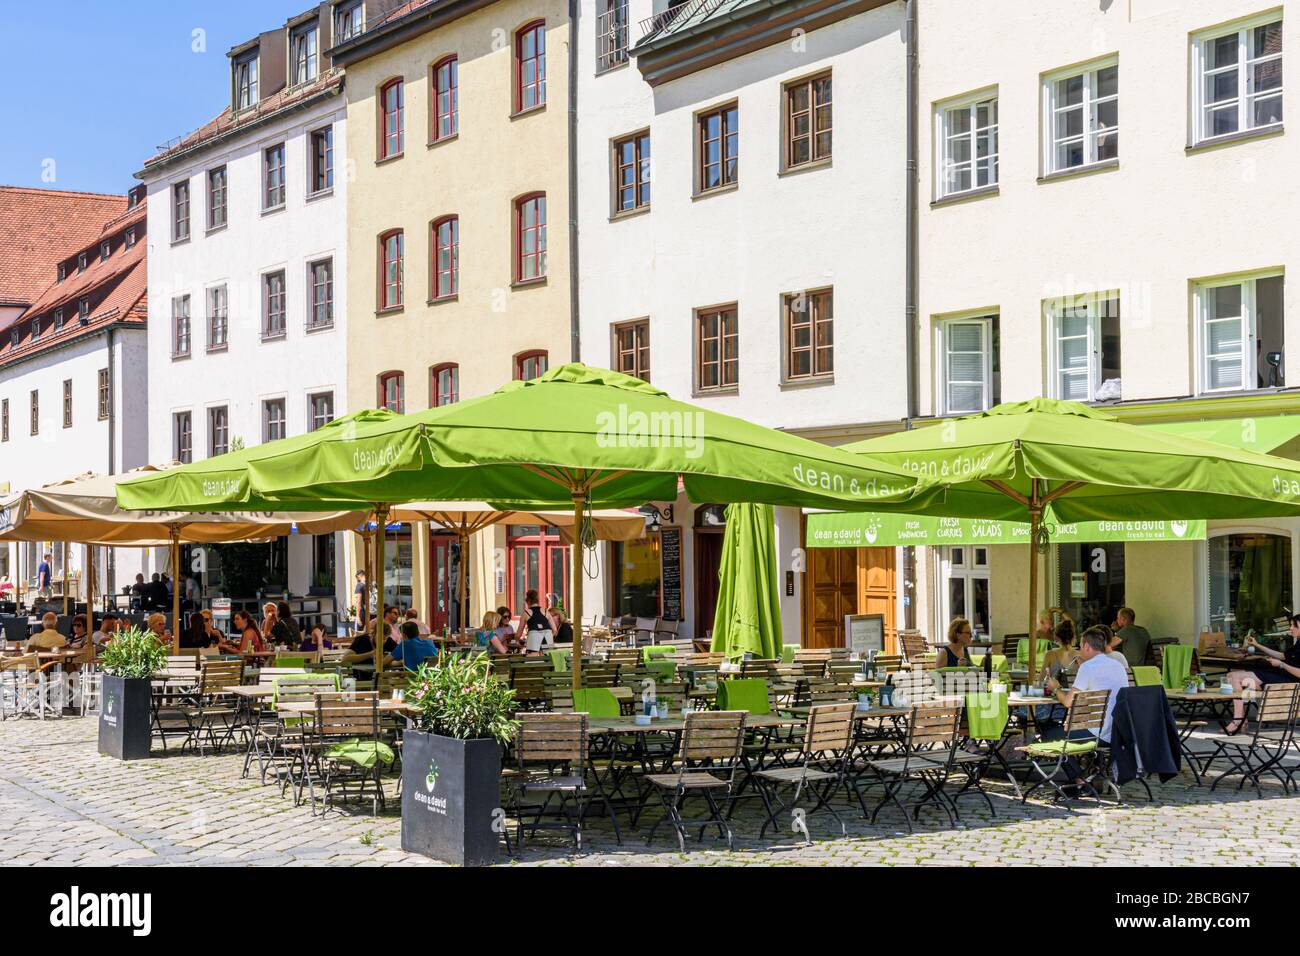 Cafes and restaurants outdoor tables in the old town of Munich, Germany Stock Photo